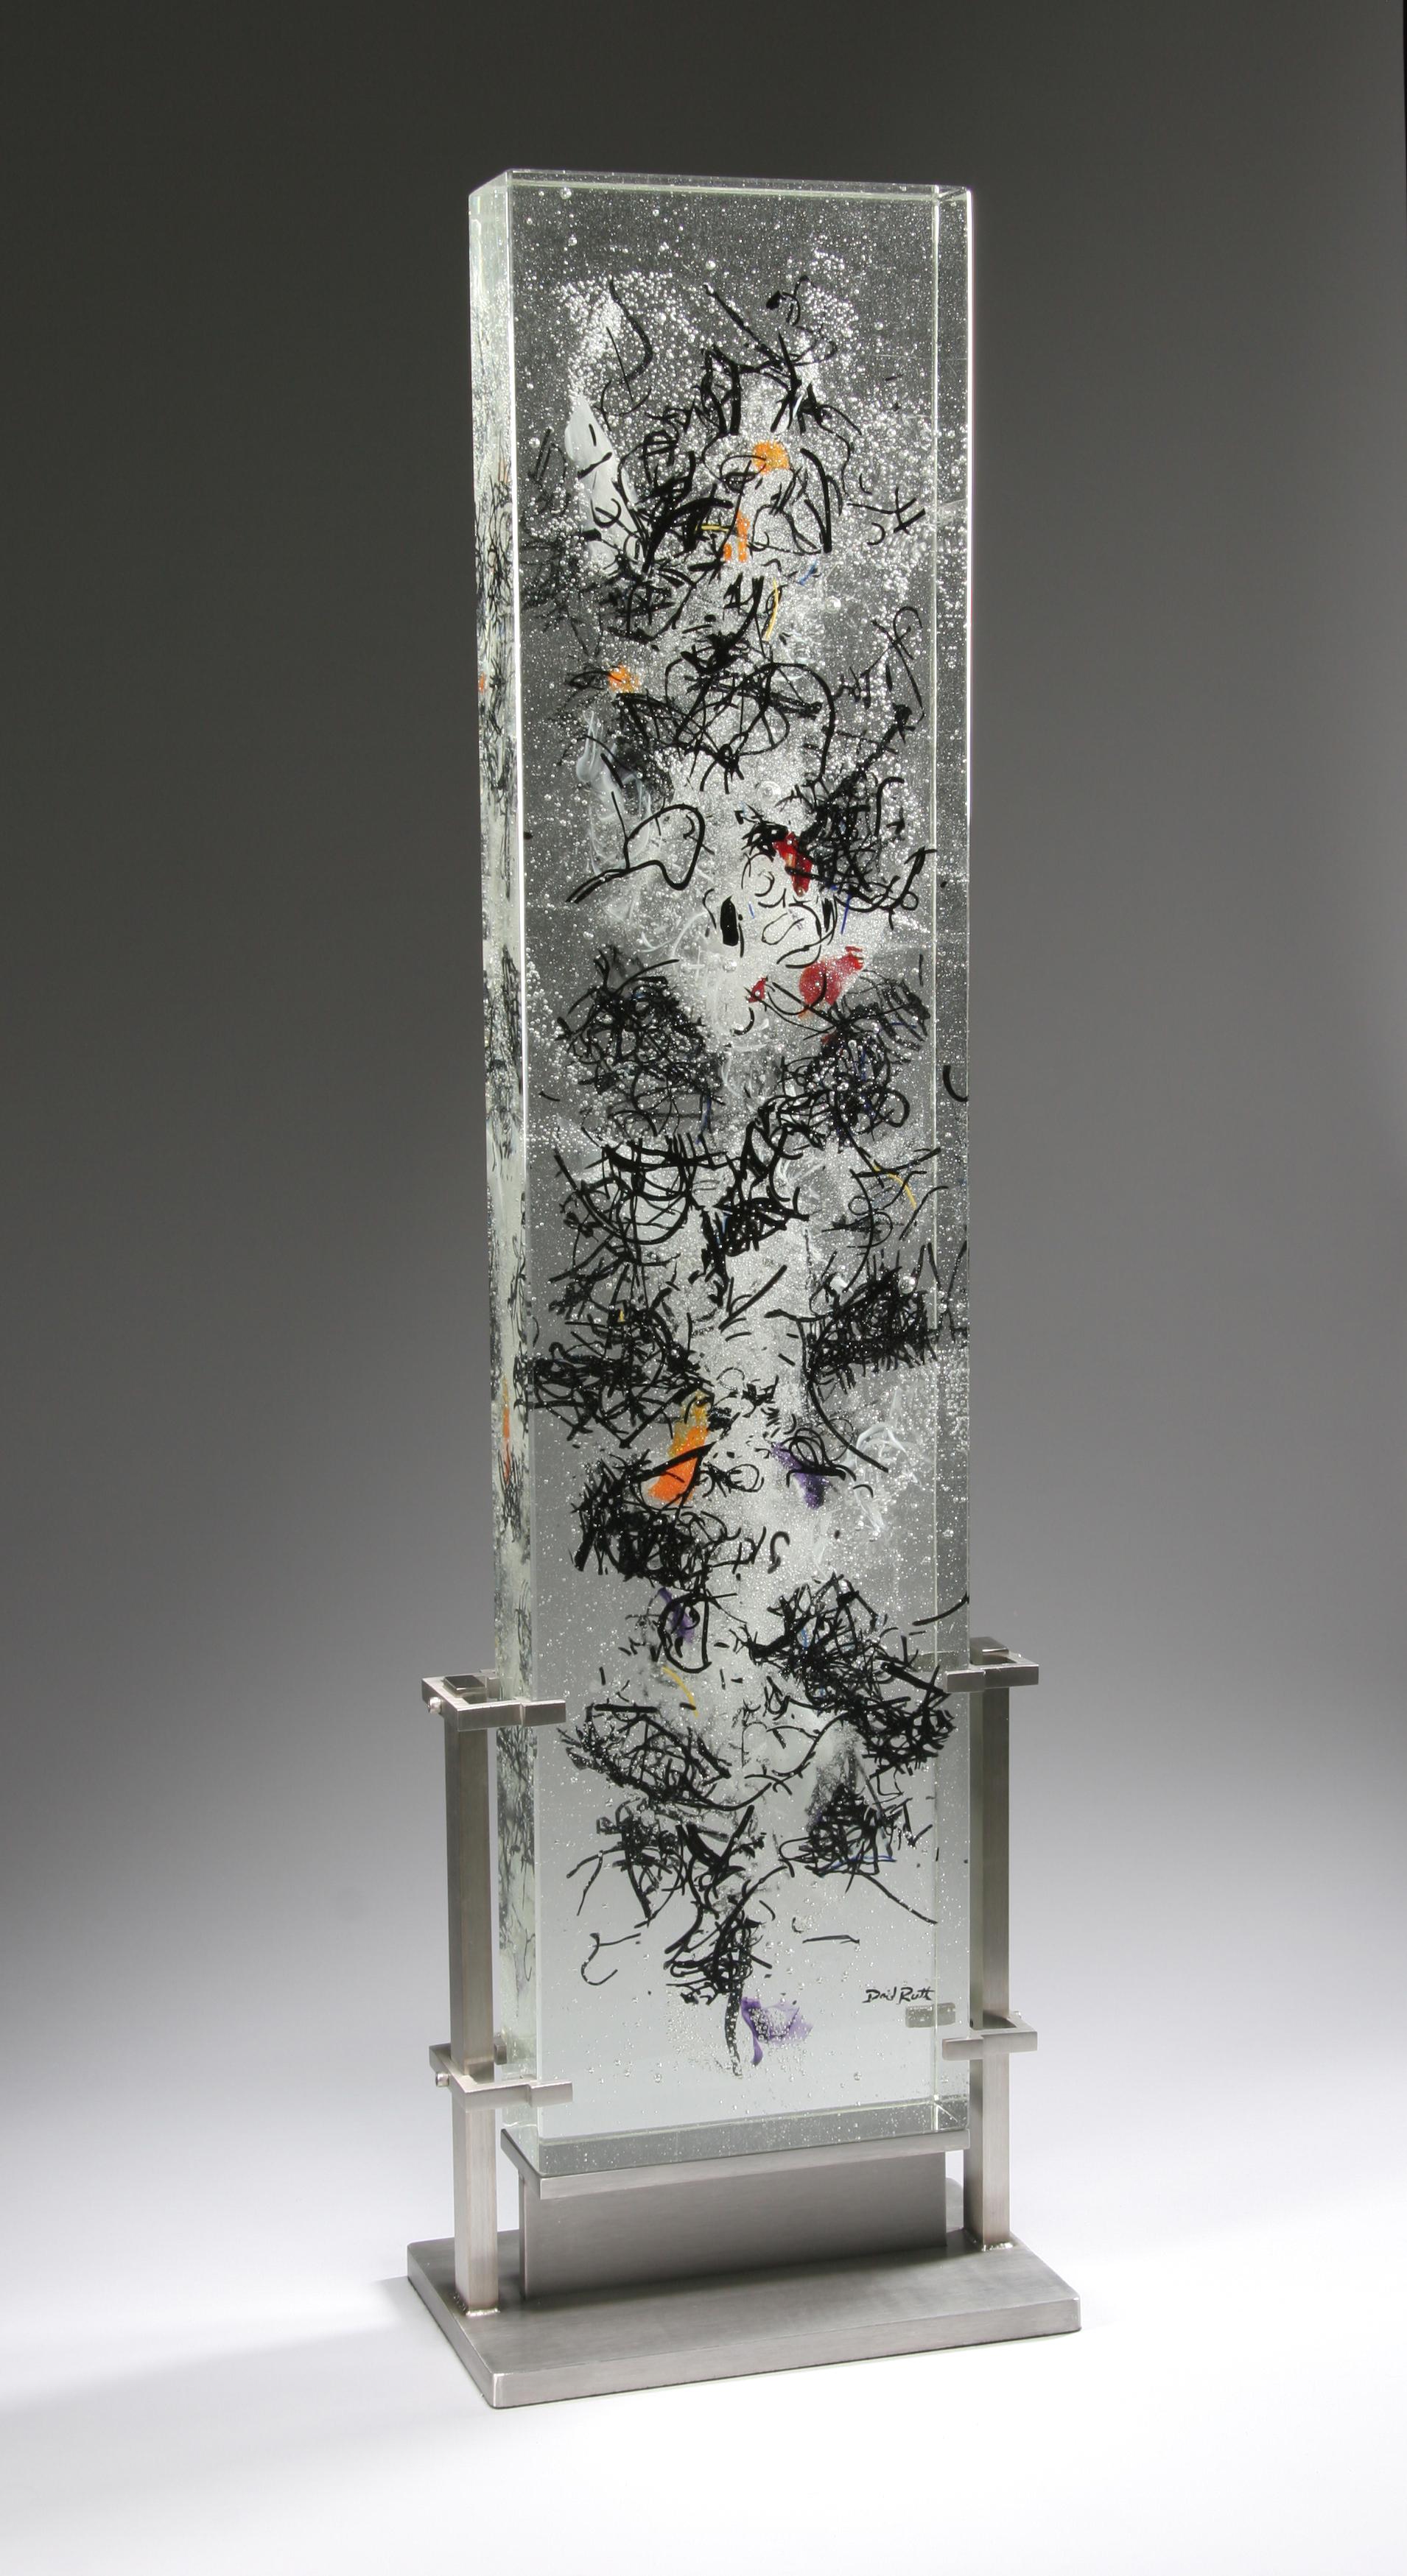 Abstract Cast Glass Sculpture, 'Holonga', 2005 by David Ruth